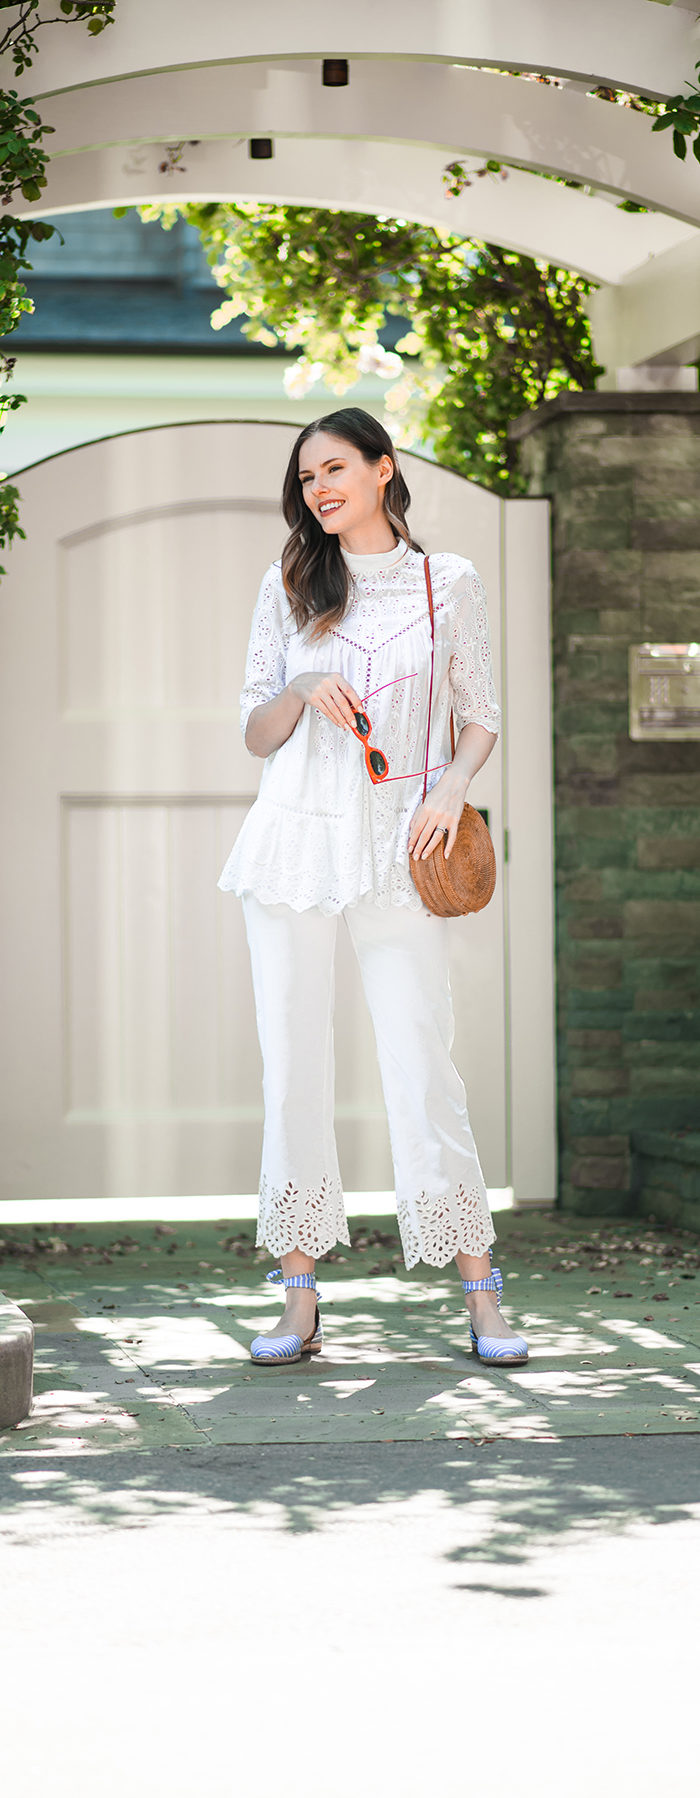 Alyssa Campanella of The A List blog wearing white eyelet Zimmermann top and Rebecca Taylor jeans and MDS Stripes Margaux NY espadrilles.